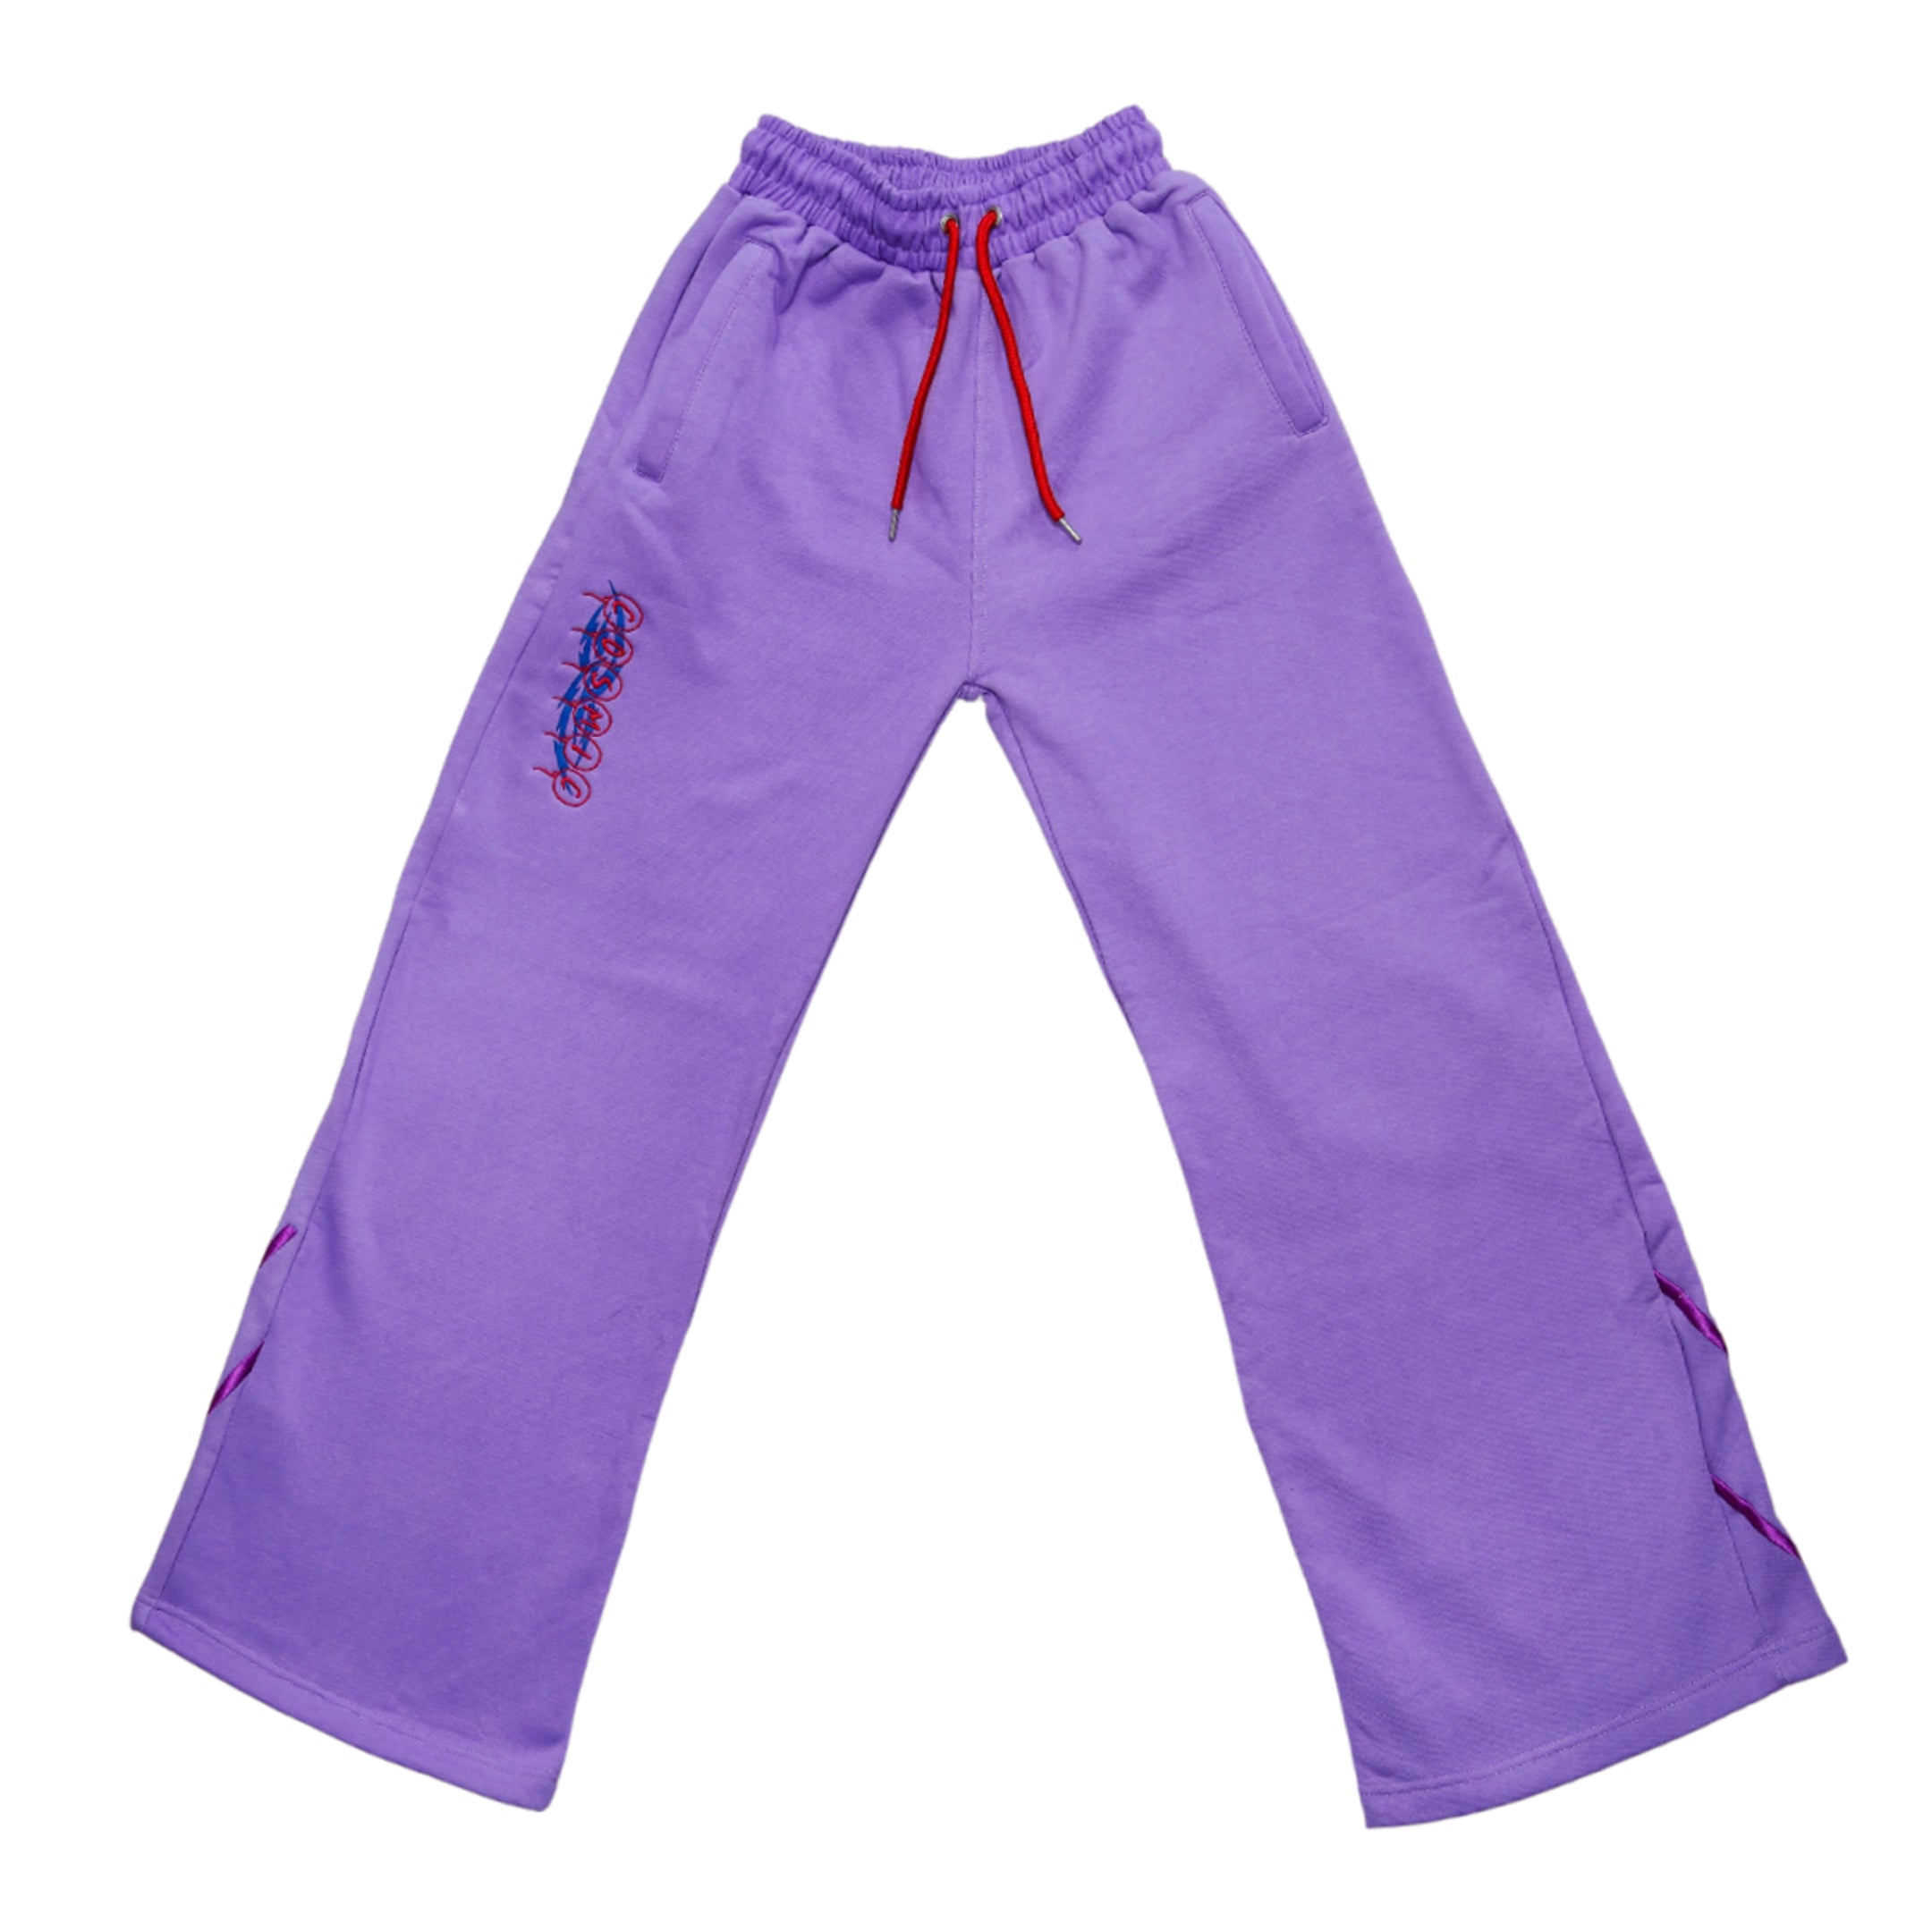 The Ube Collection features these 100% cotton purple heavyweight sweat pants, with quality embroidery, red draw string and side pockets and back patch pocket.  Forms a sweatsuit set with the Paris Heavyweight Embroidered Hoodie (sold separately).